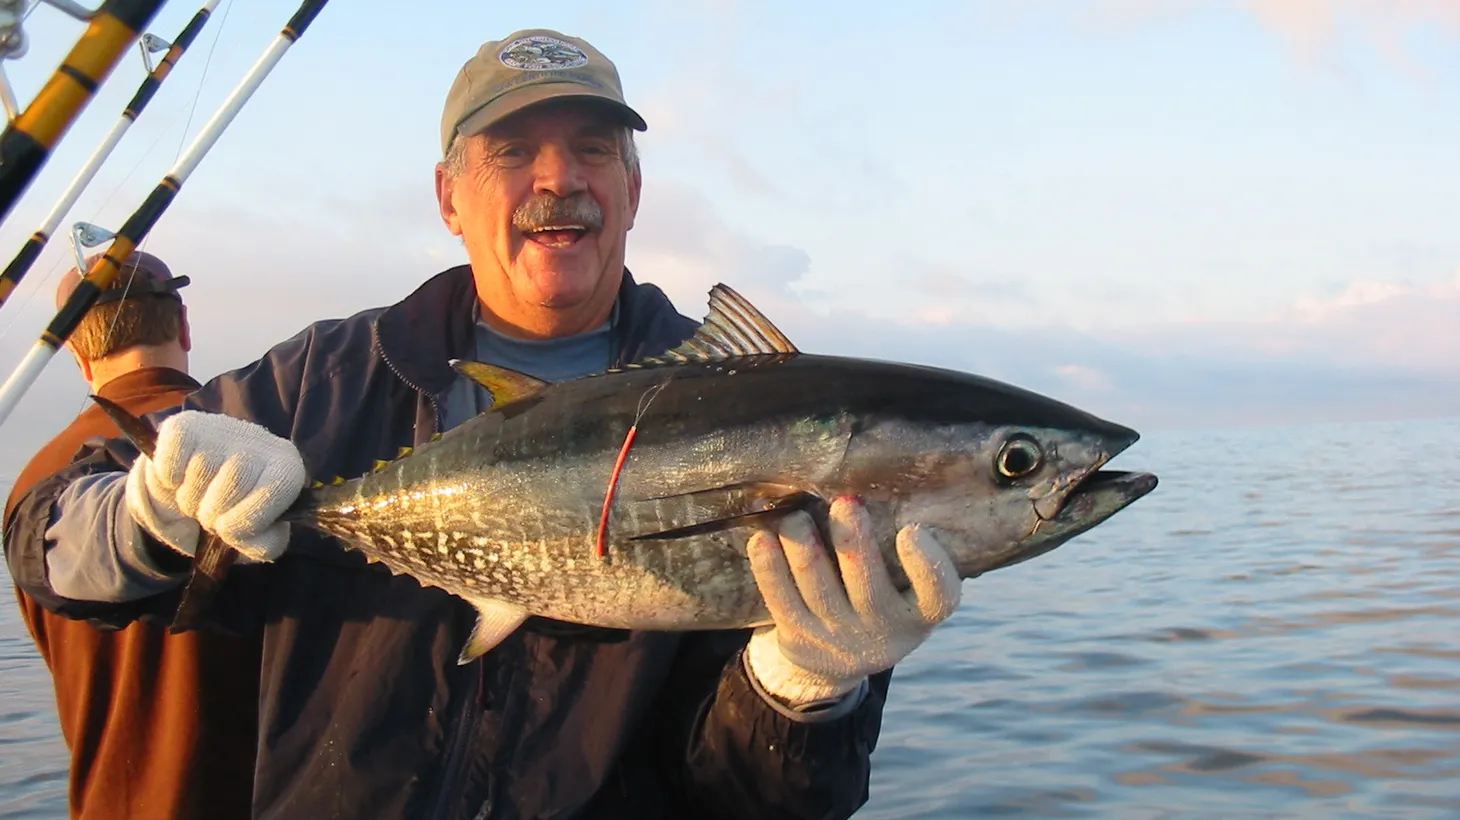 Charter boat captain Al Anderson catches living tuna off the coast of New England then throws the fish back in the ocean after tagging them.